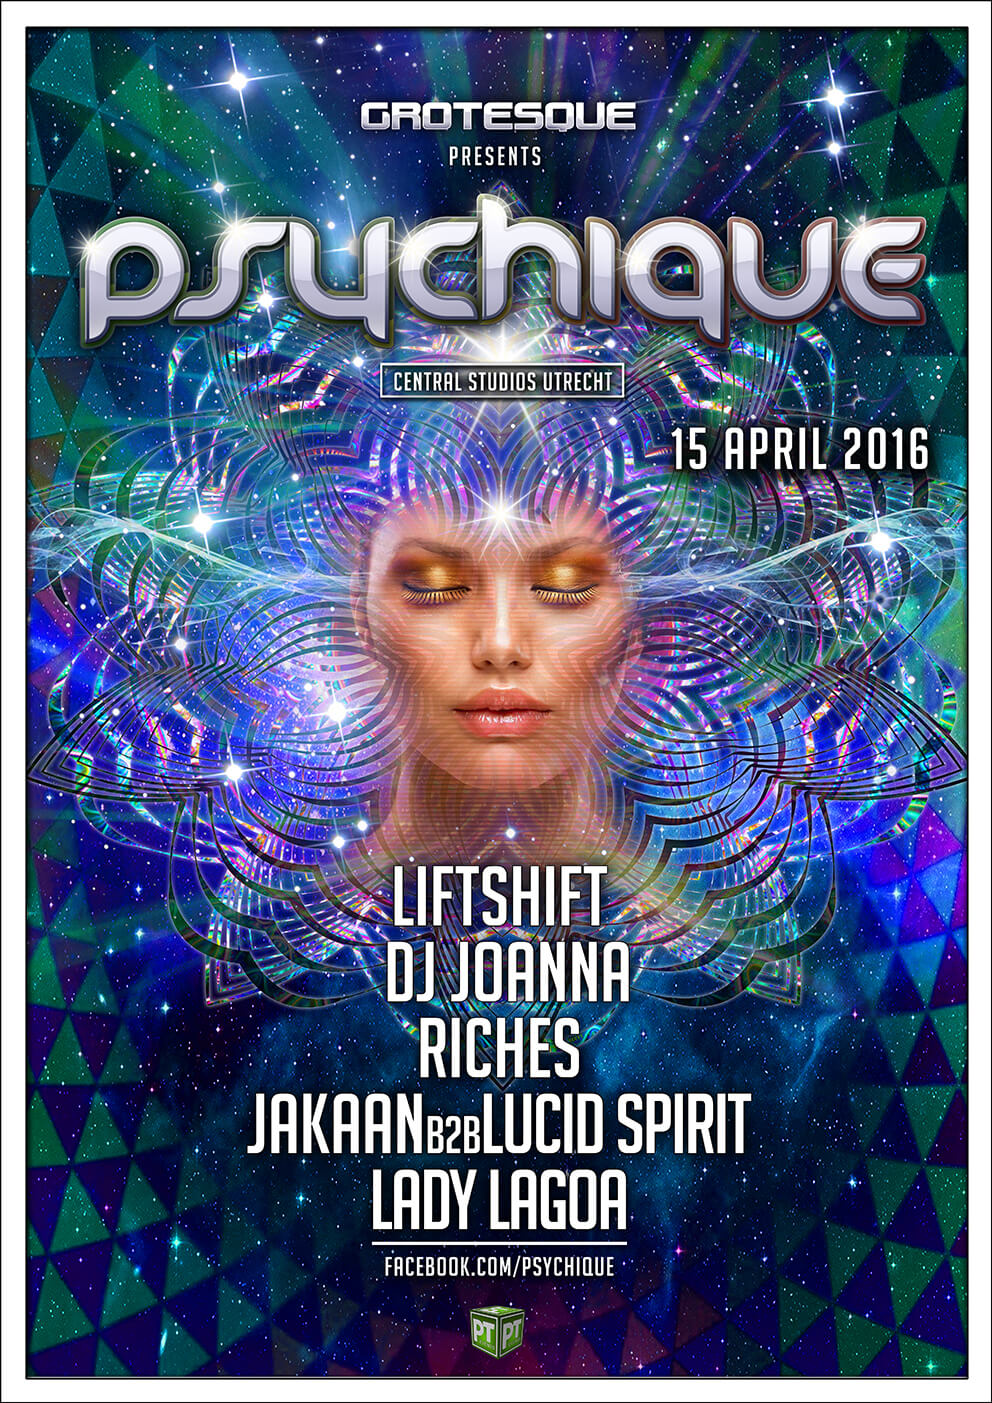 Grotesque presents Psychique at Central Studios, Utrecht, Holland on 15th of April 2016